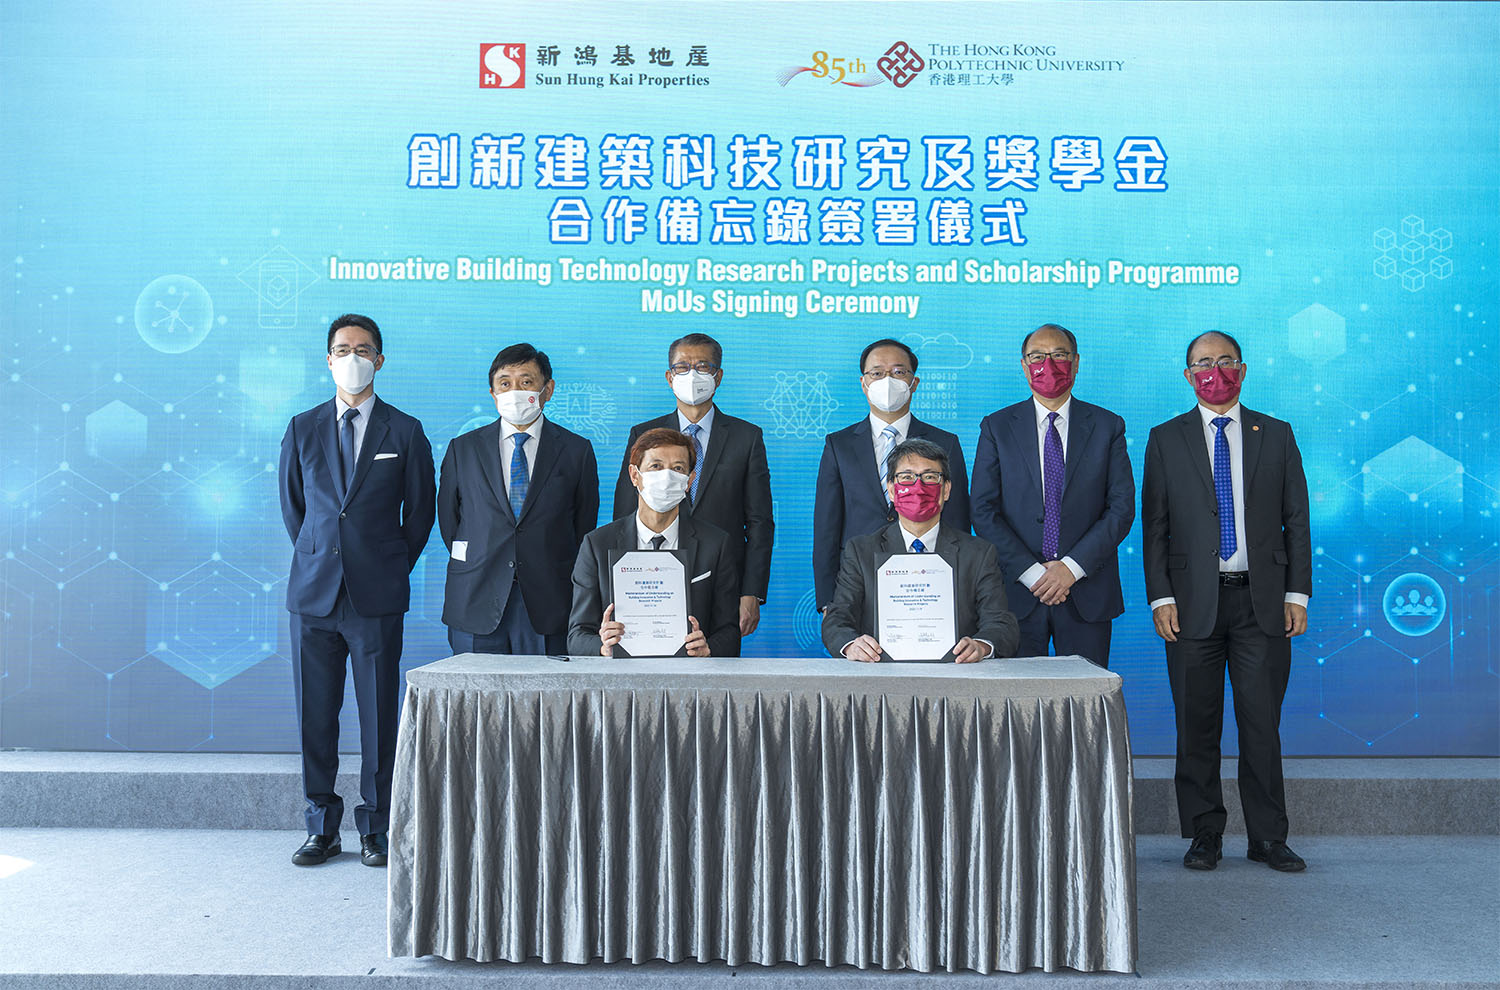 Signs memoranda of understanding on building innovation and technology research projects and a scholarship programme with The Hong Kong Polytechnic University